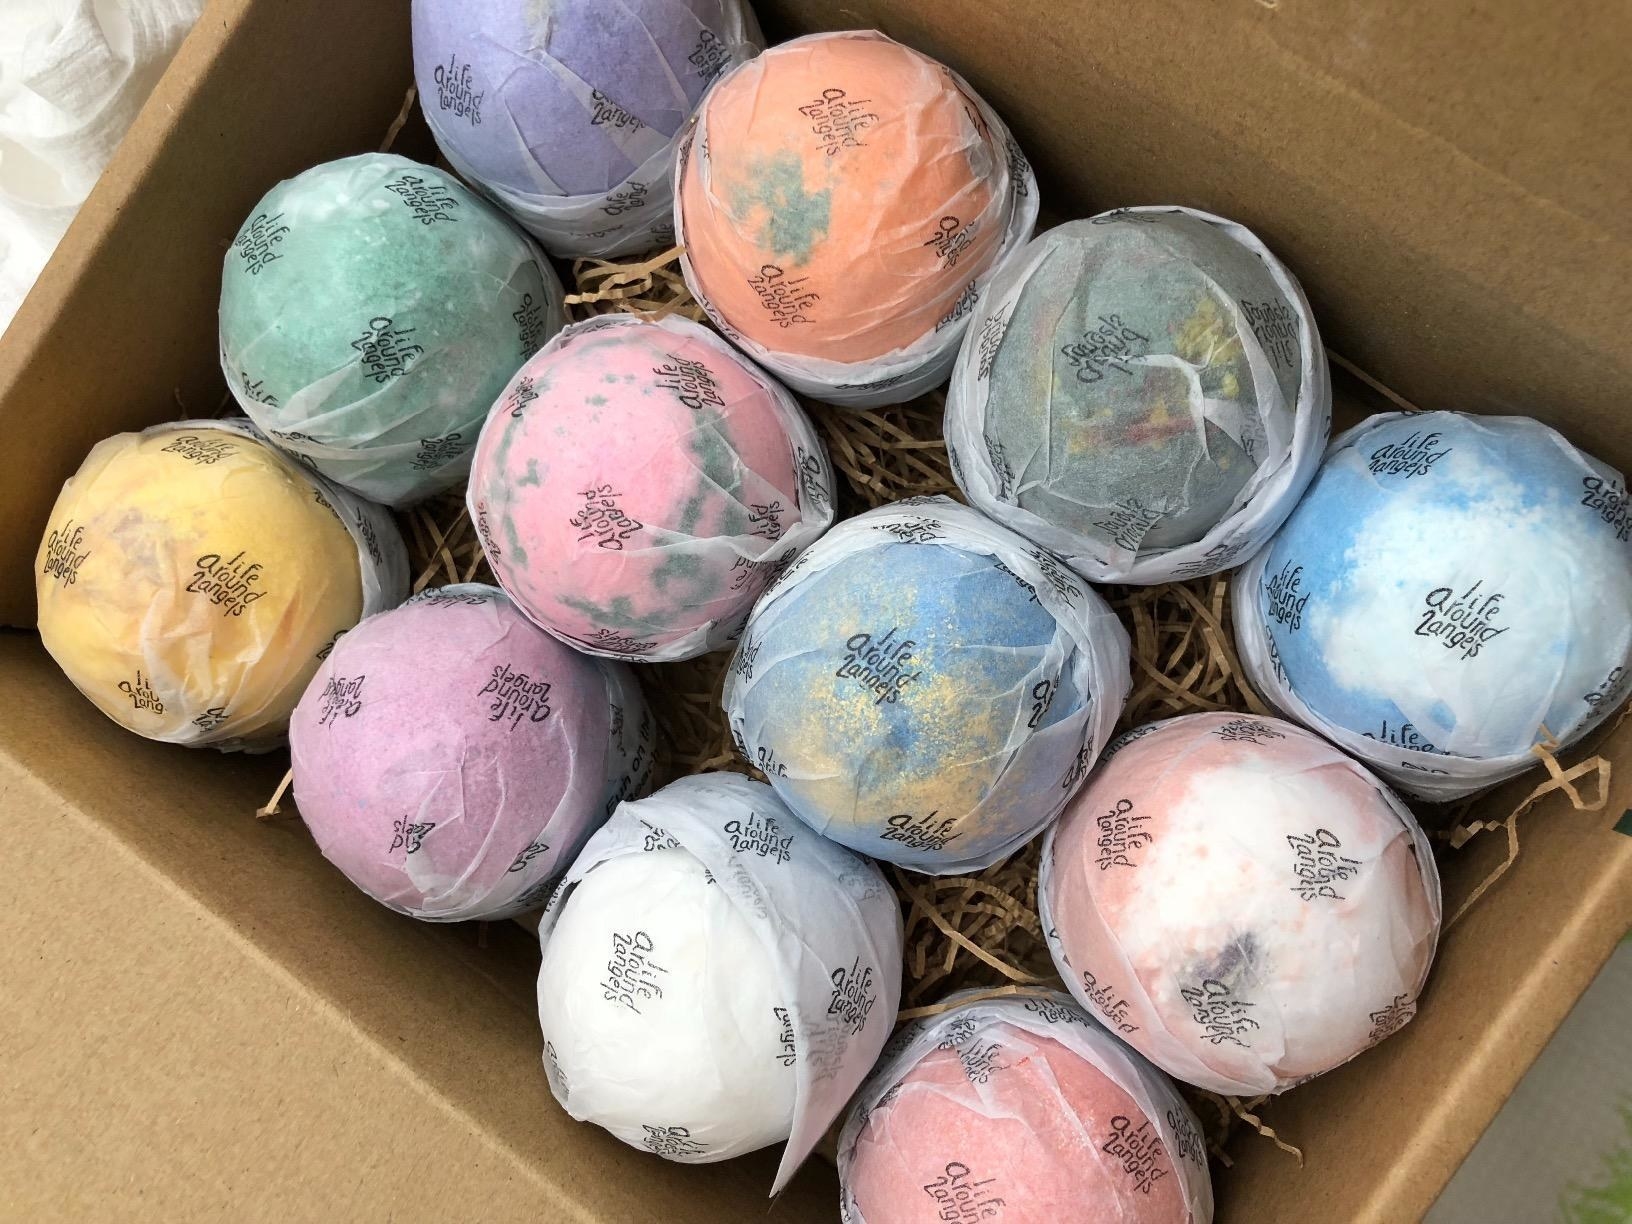 the colorful bath bombs